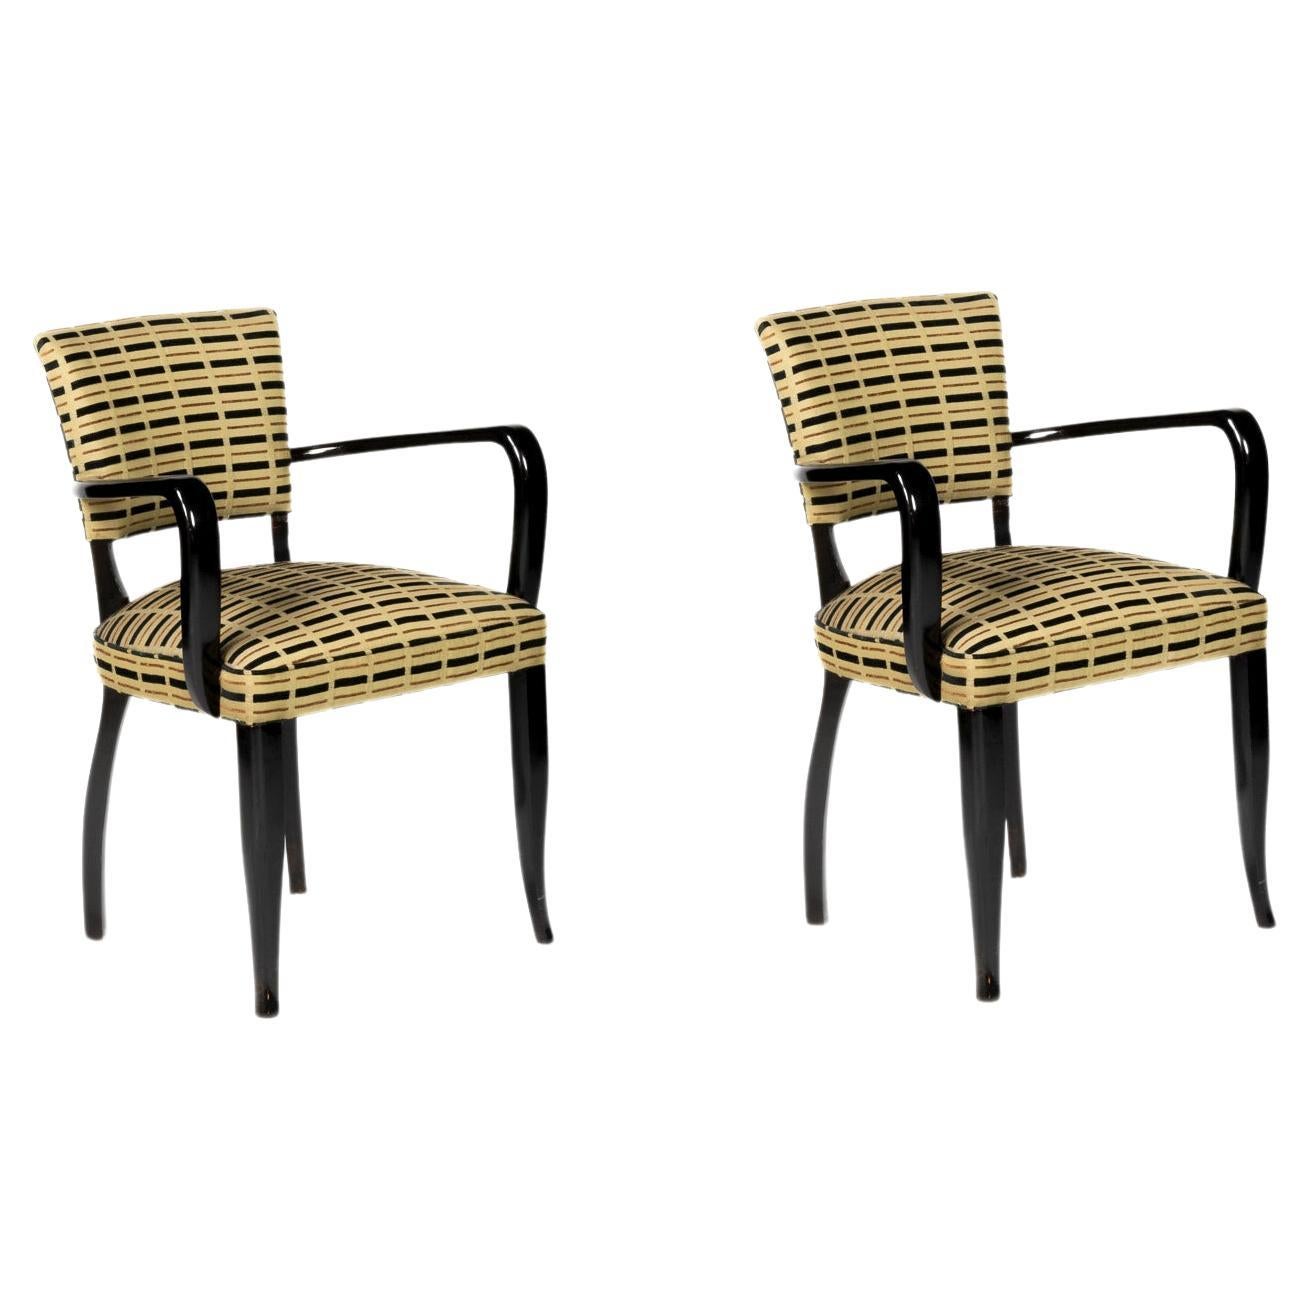 Set of 2 French Bridge Chairs, 20th Century Art Deco For Sale